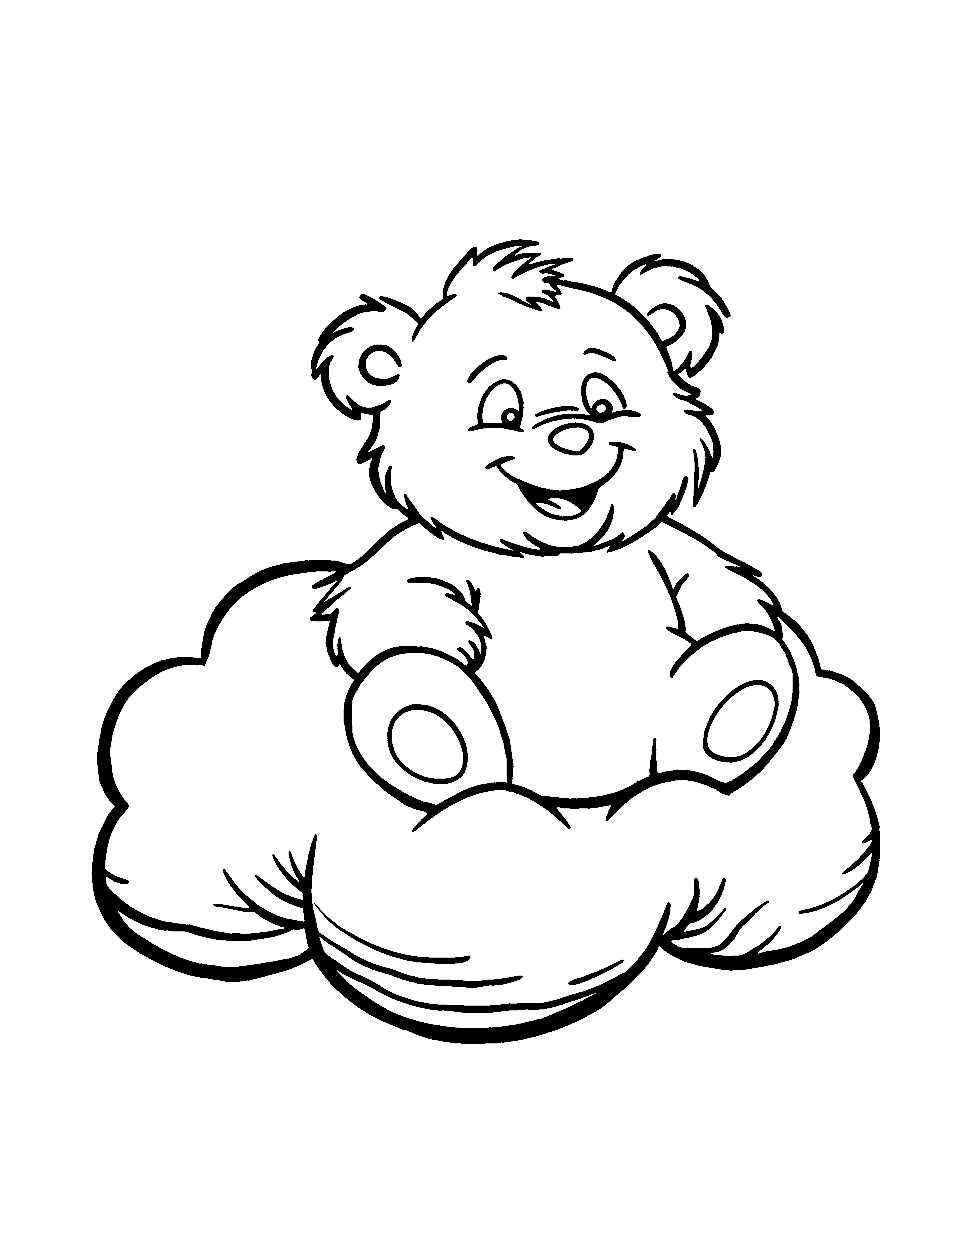 Teddy Bear on a Cloud Coloring Page - A teddy bear sitting on a fluffy cloud, looking relaxed.